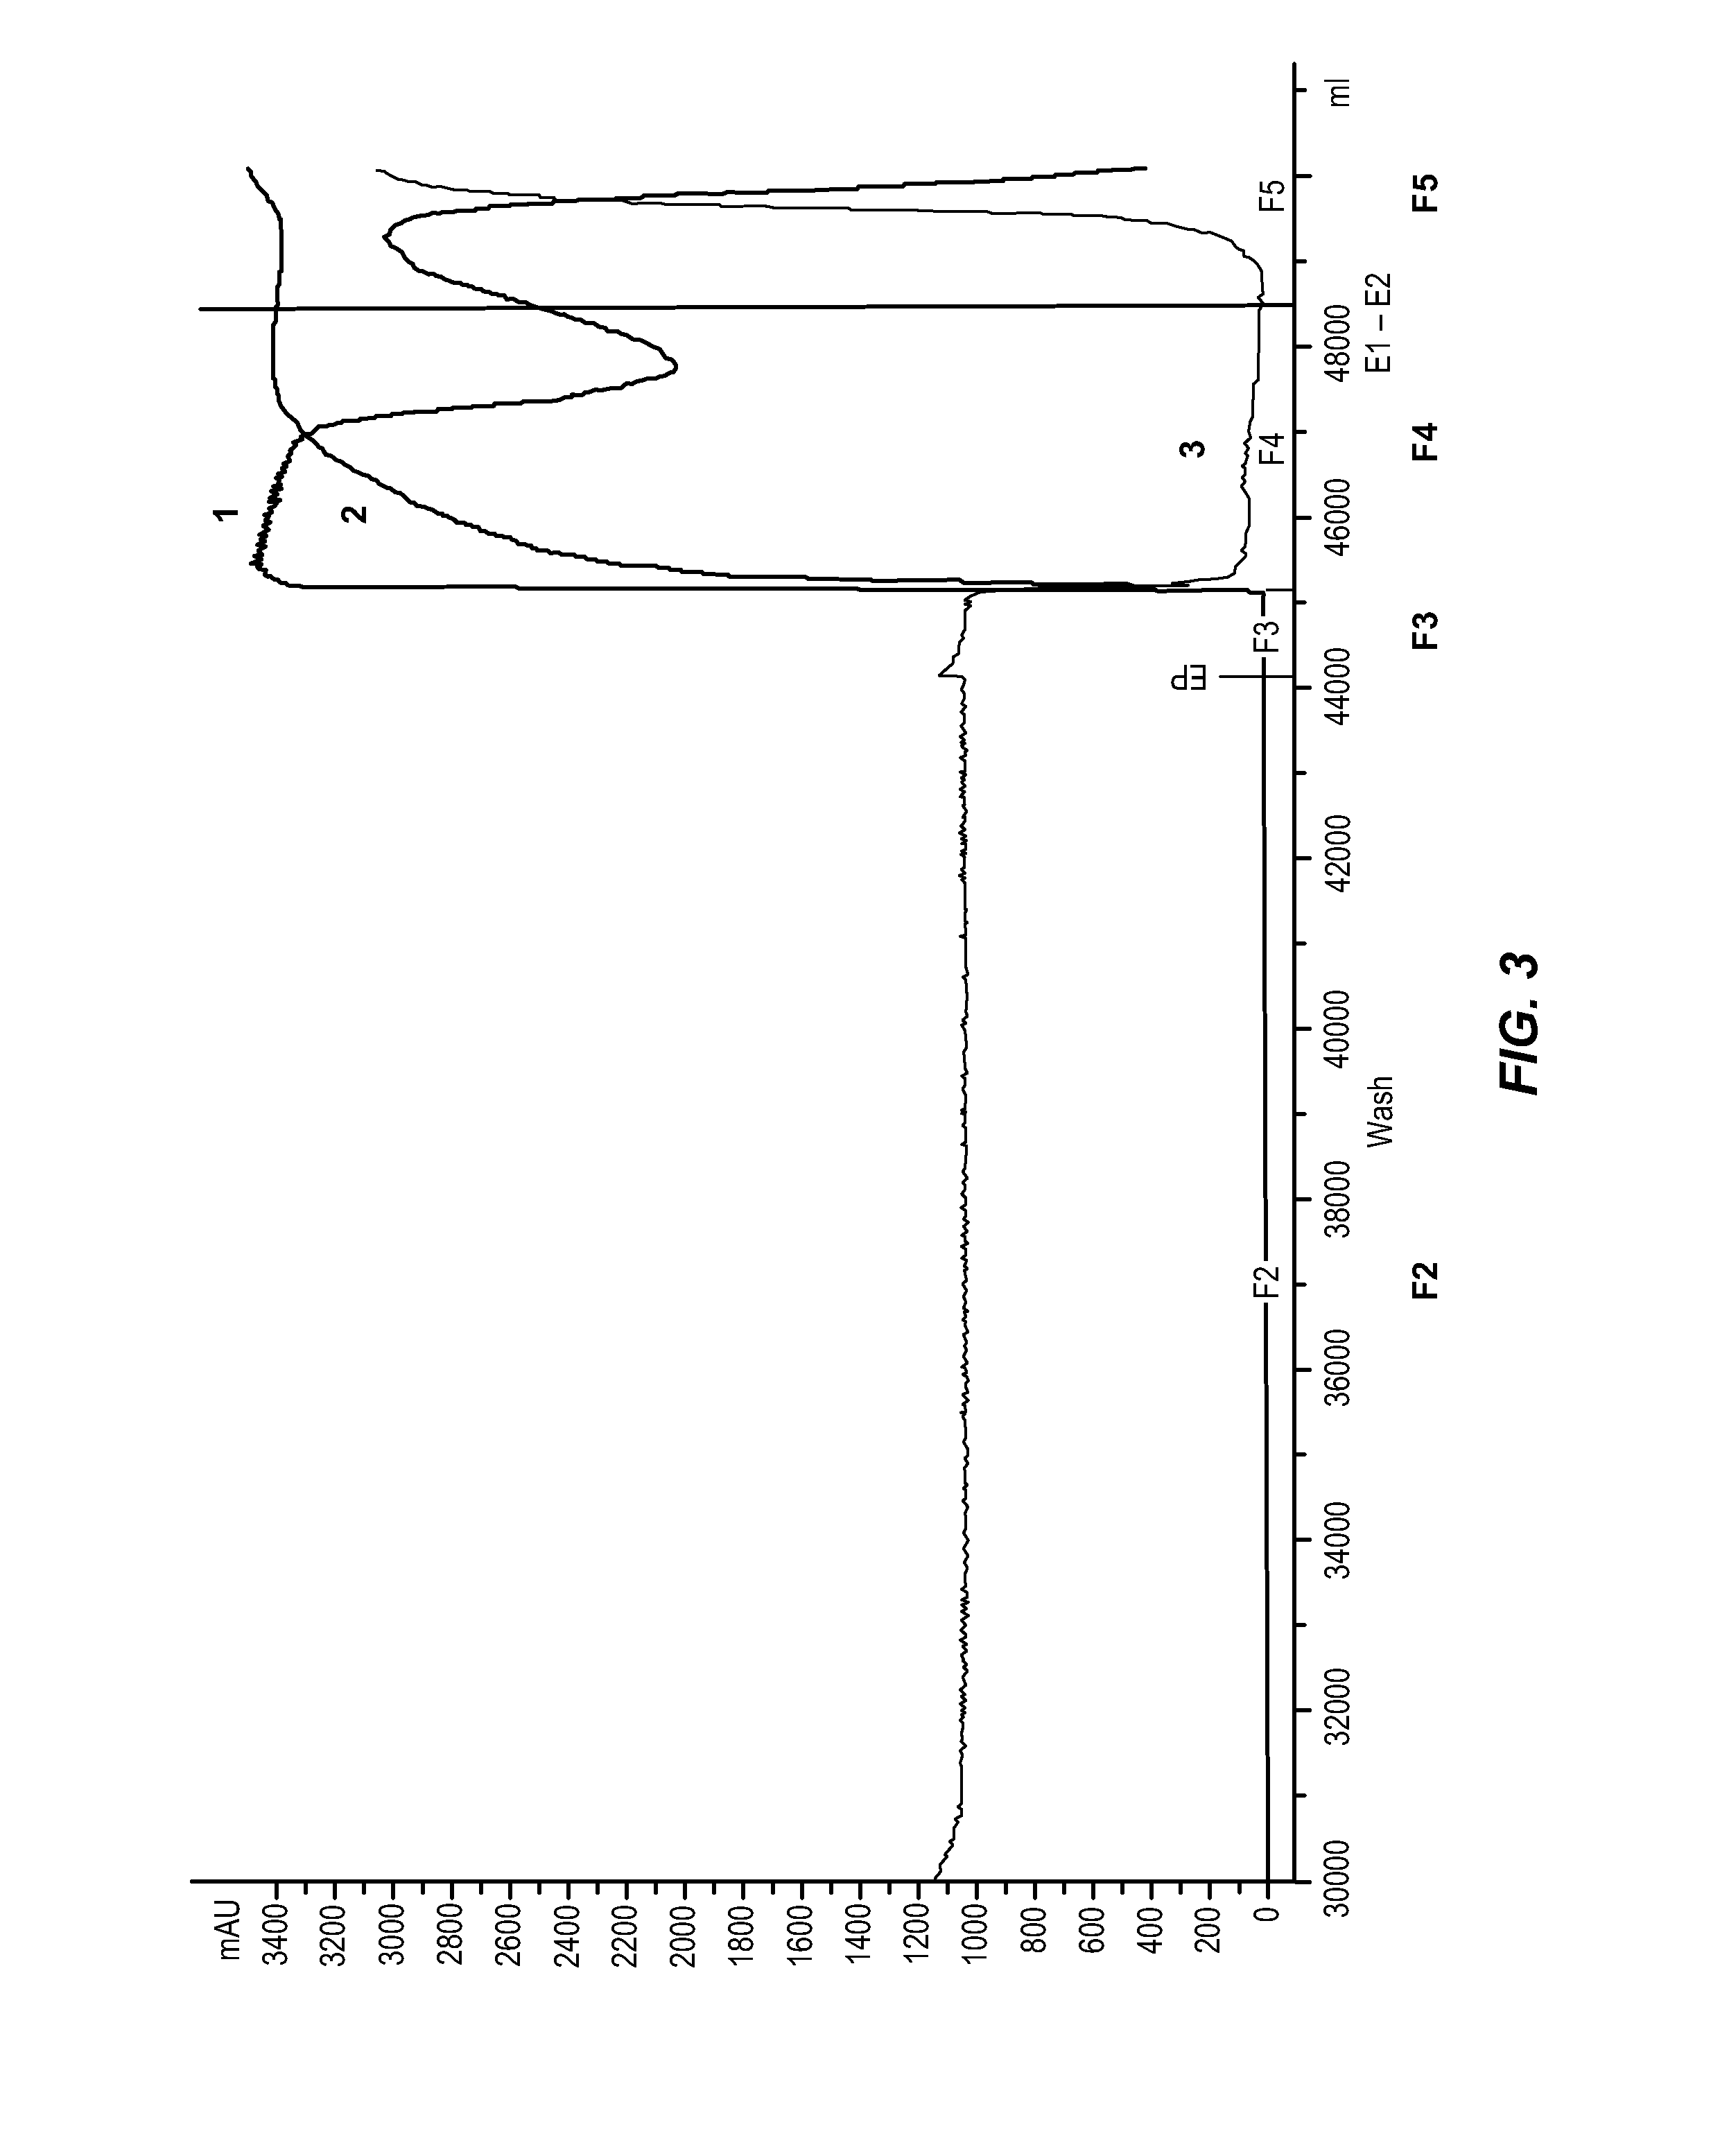 Method for reducing the thromboembolic potential of a plasma-derived immunoglobulin composition